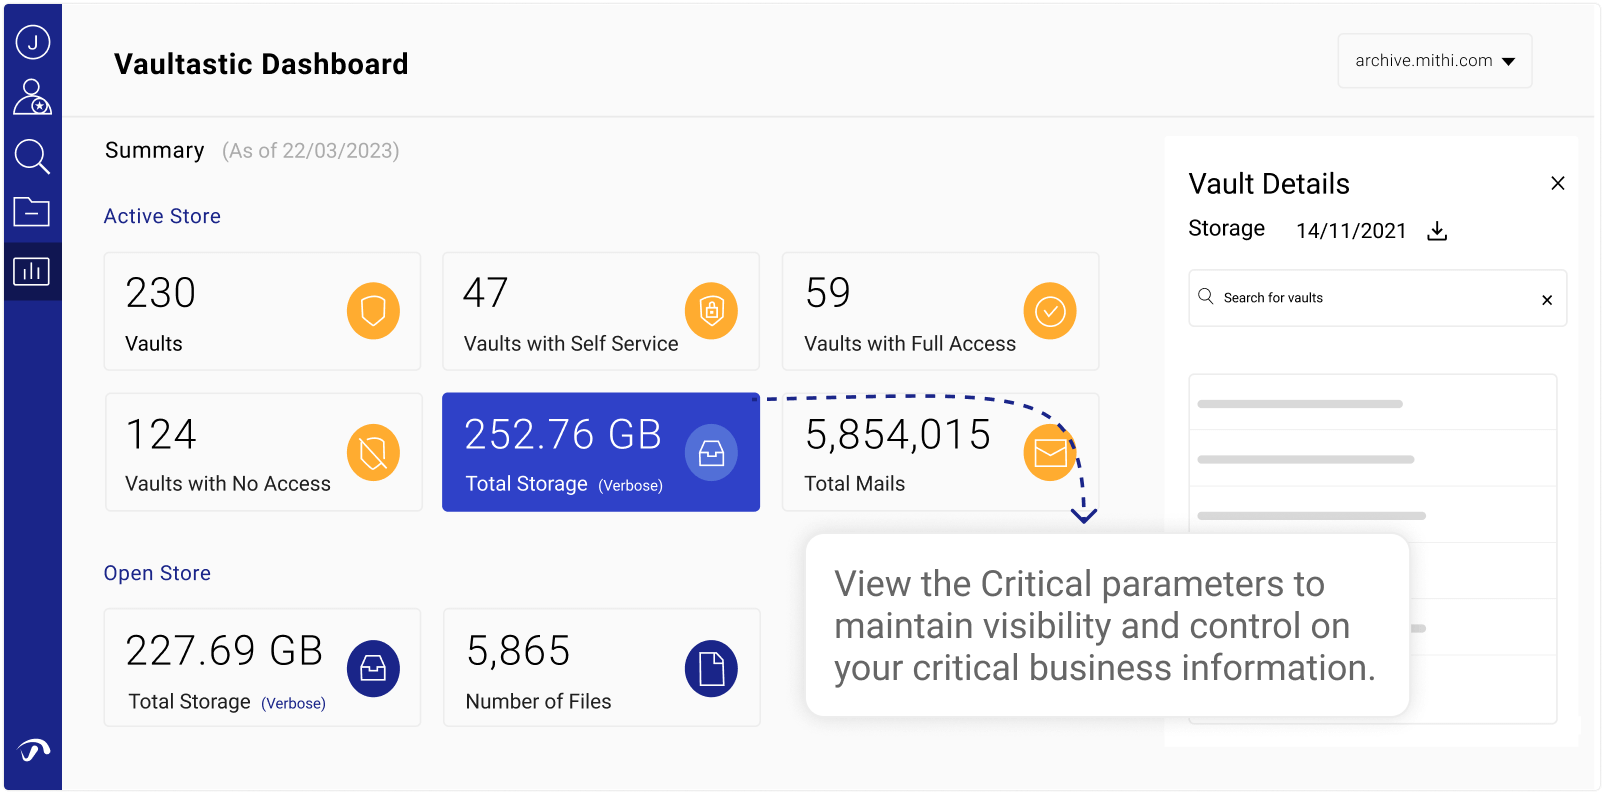 View the Critical parameters to maintain visibility and control on your critical business information with vaultastic dashboard.